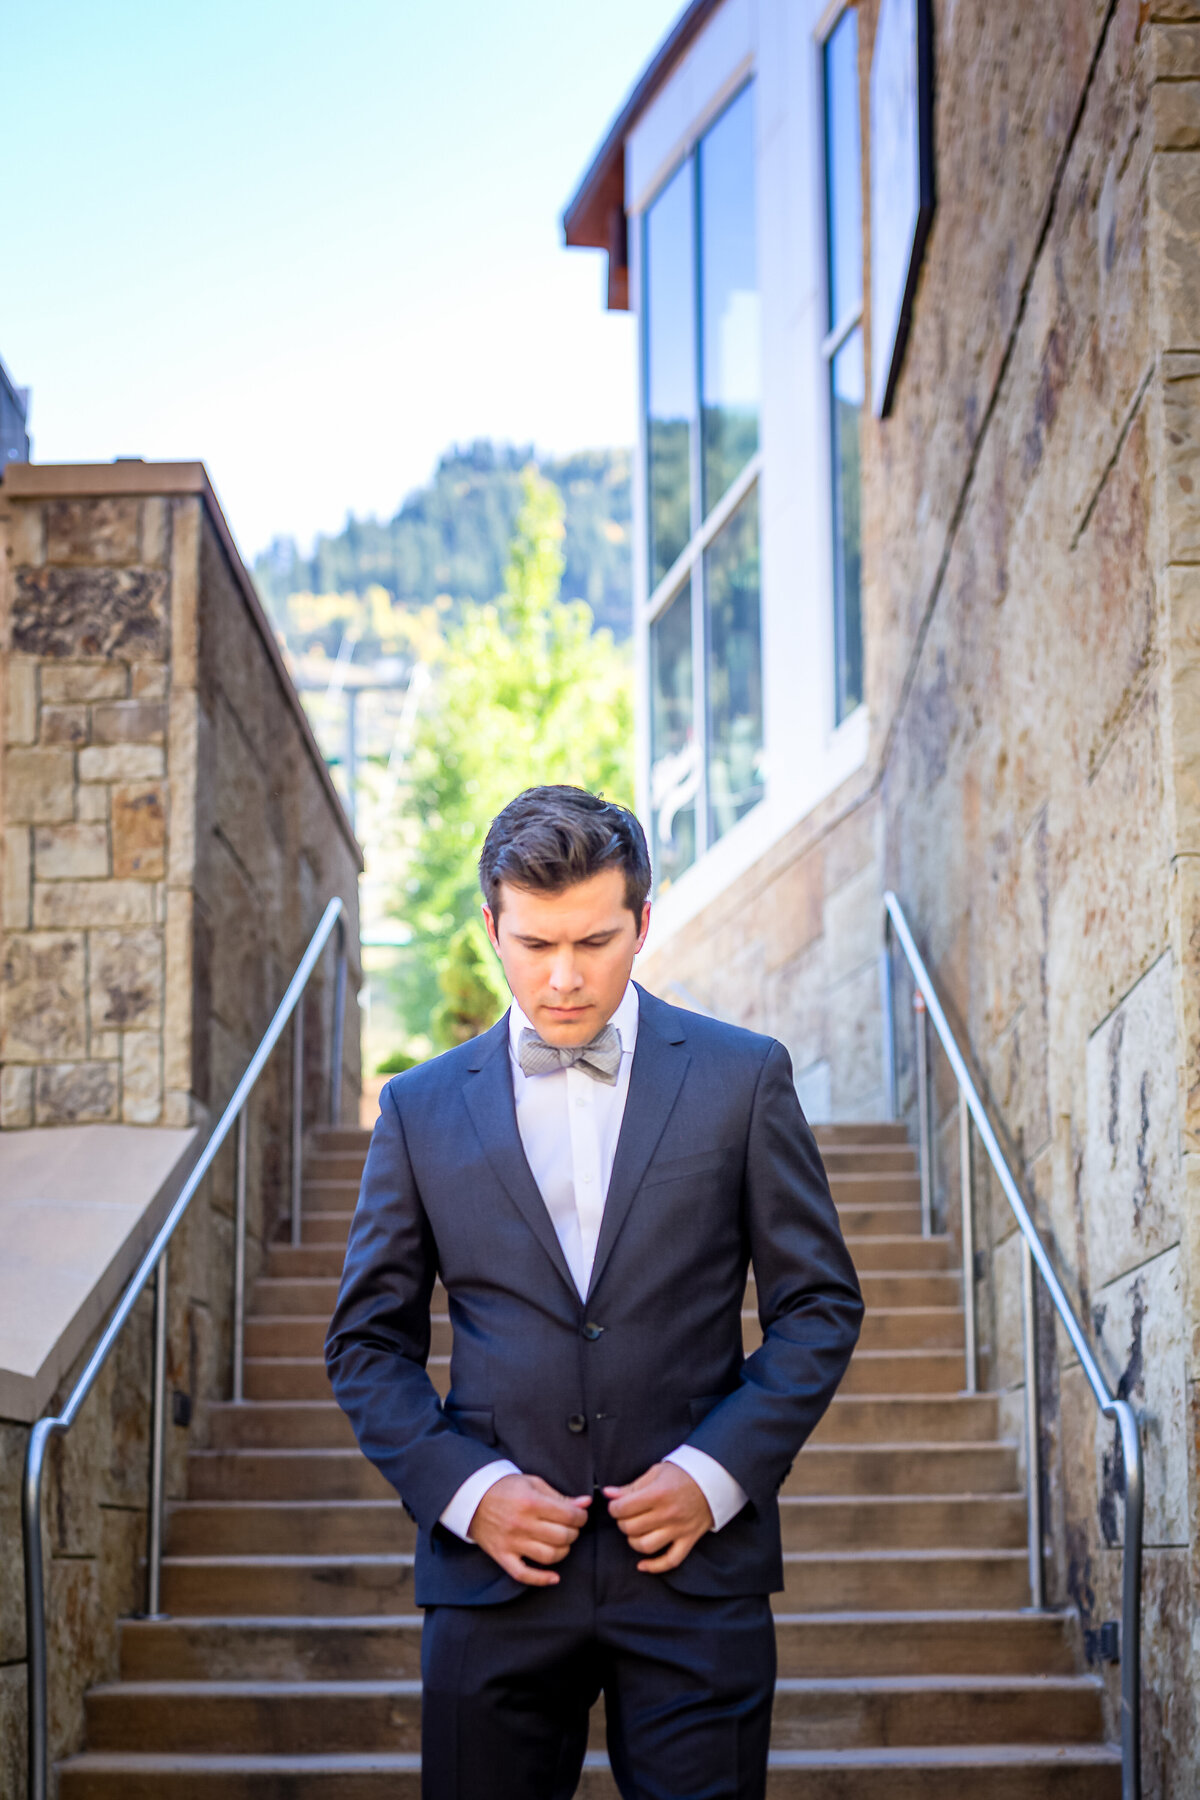 A Groom Gets Ready for his wedding in Aspen